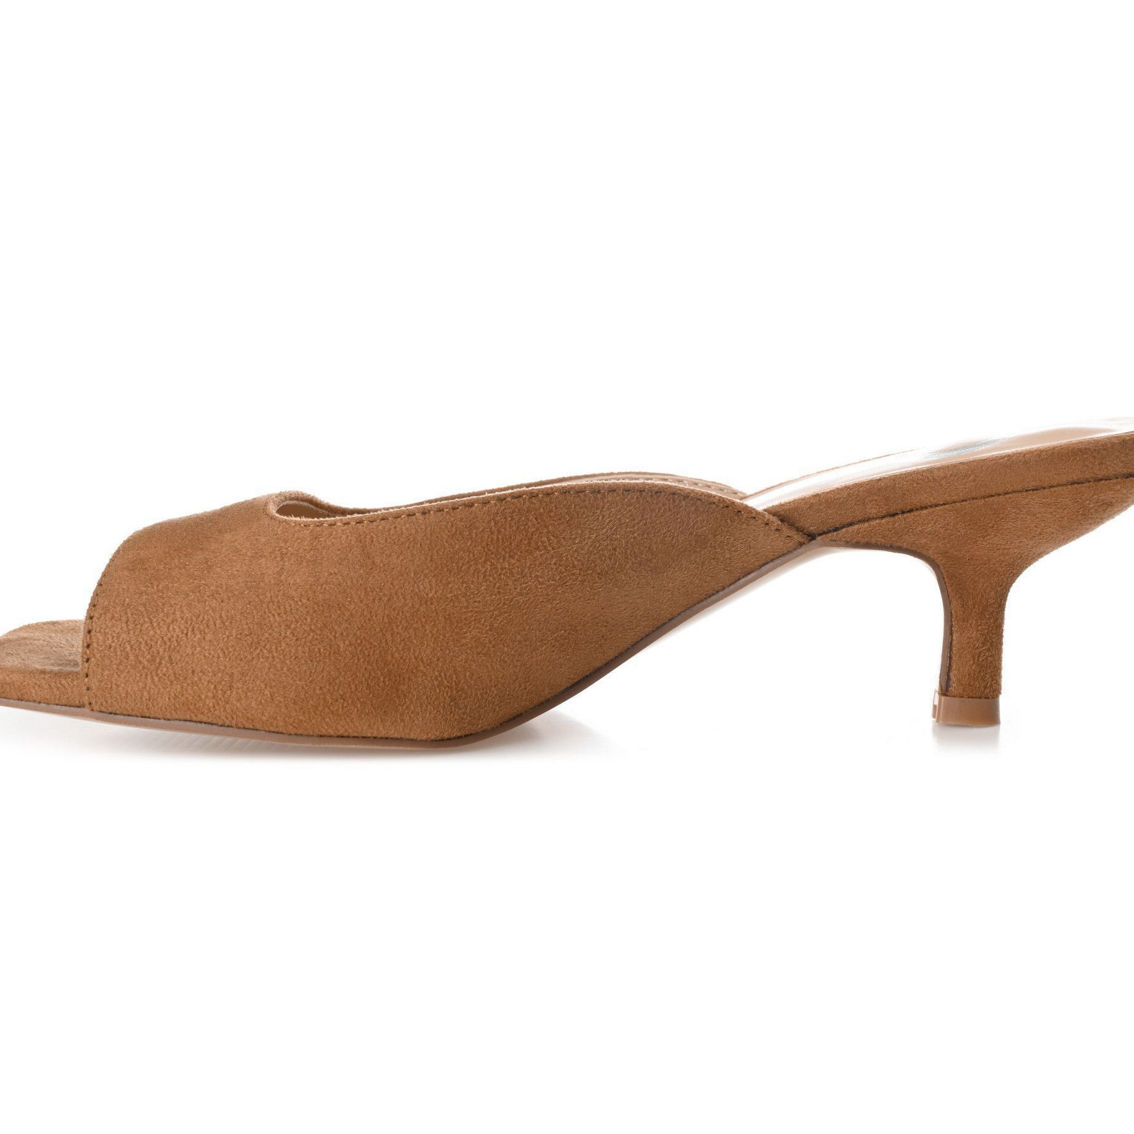 Journee Collection Women's Larna Medium and Wide Width Pump - Image 4 of 5